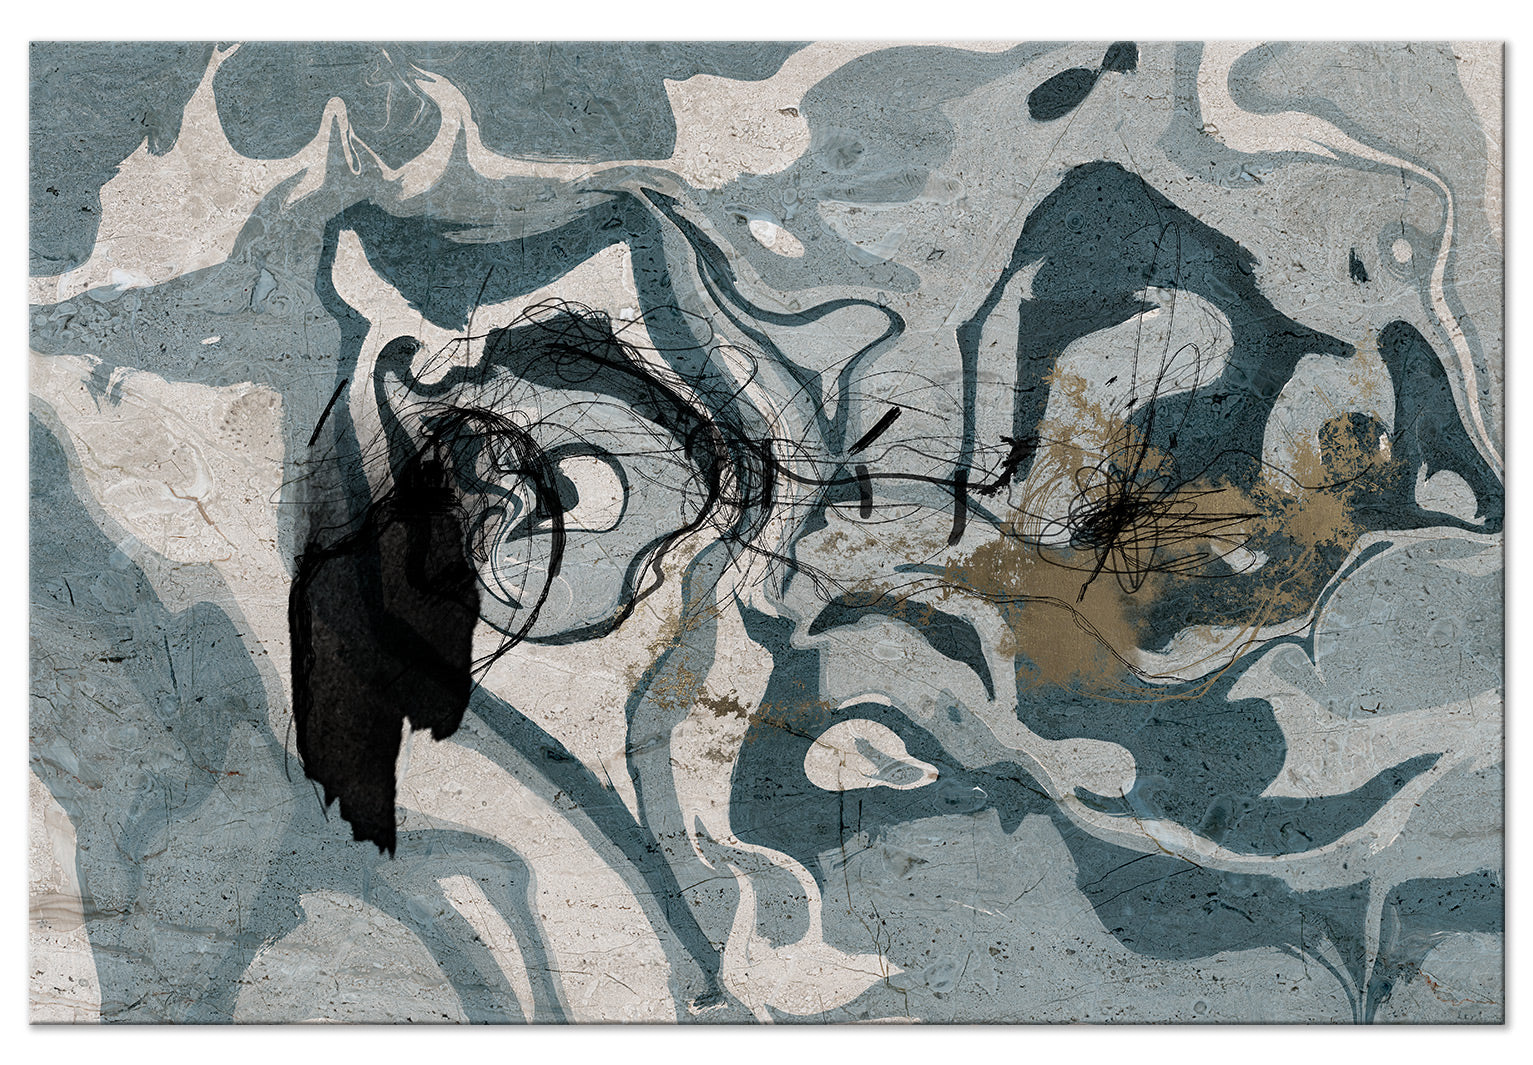 Abstract Canvas Wall Art - Marbled Reflection